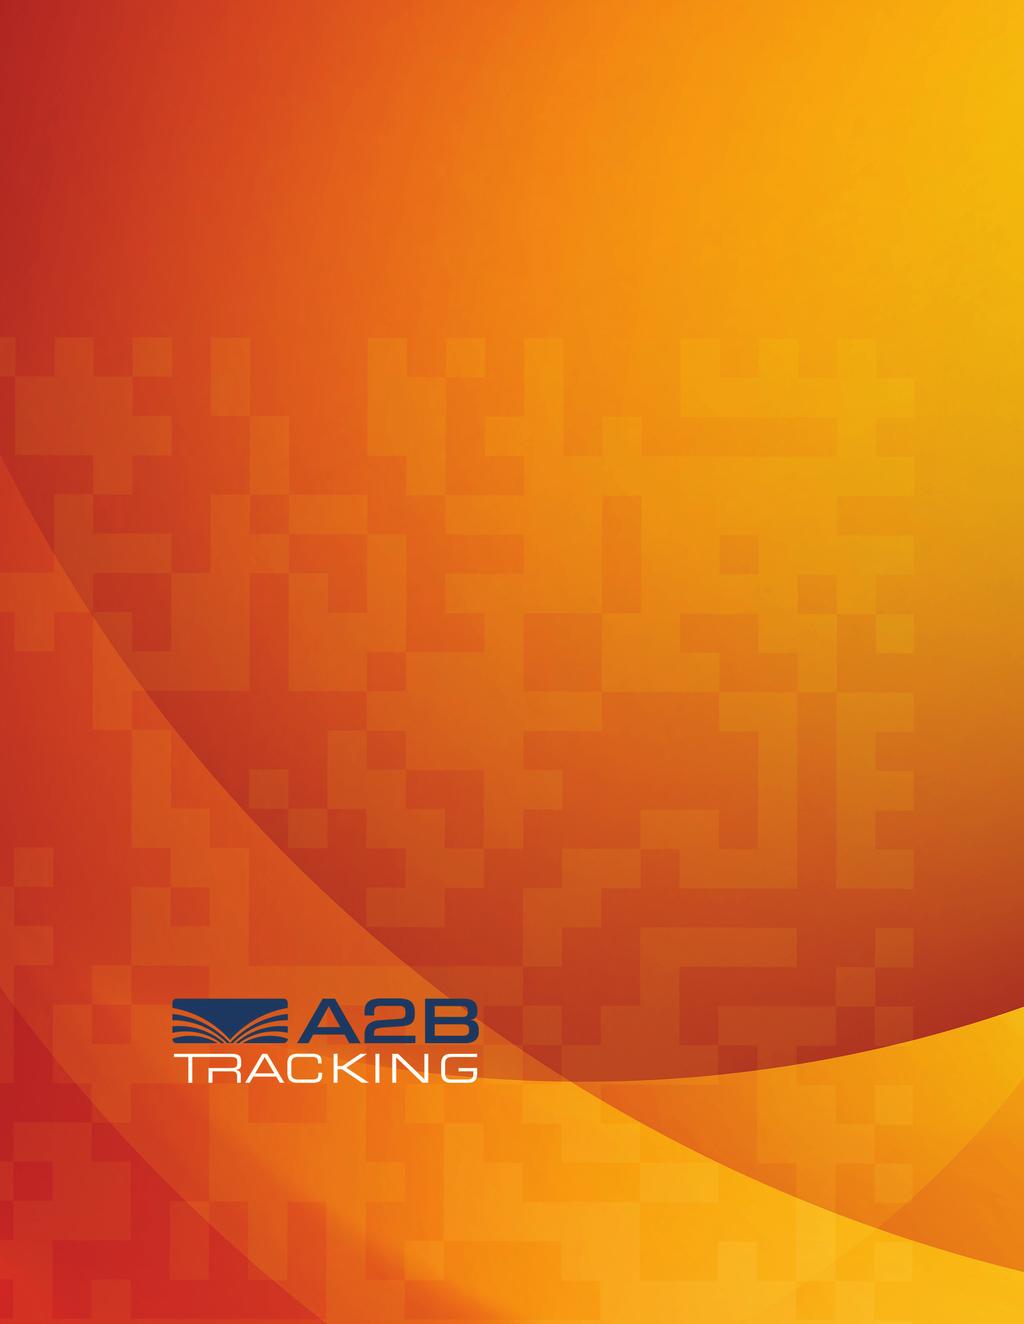 MILITARY GRADE TECHNOLOGY. Proven partners. A2B Tracking.